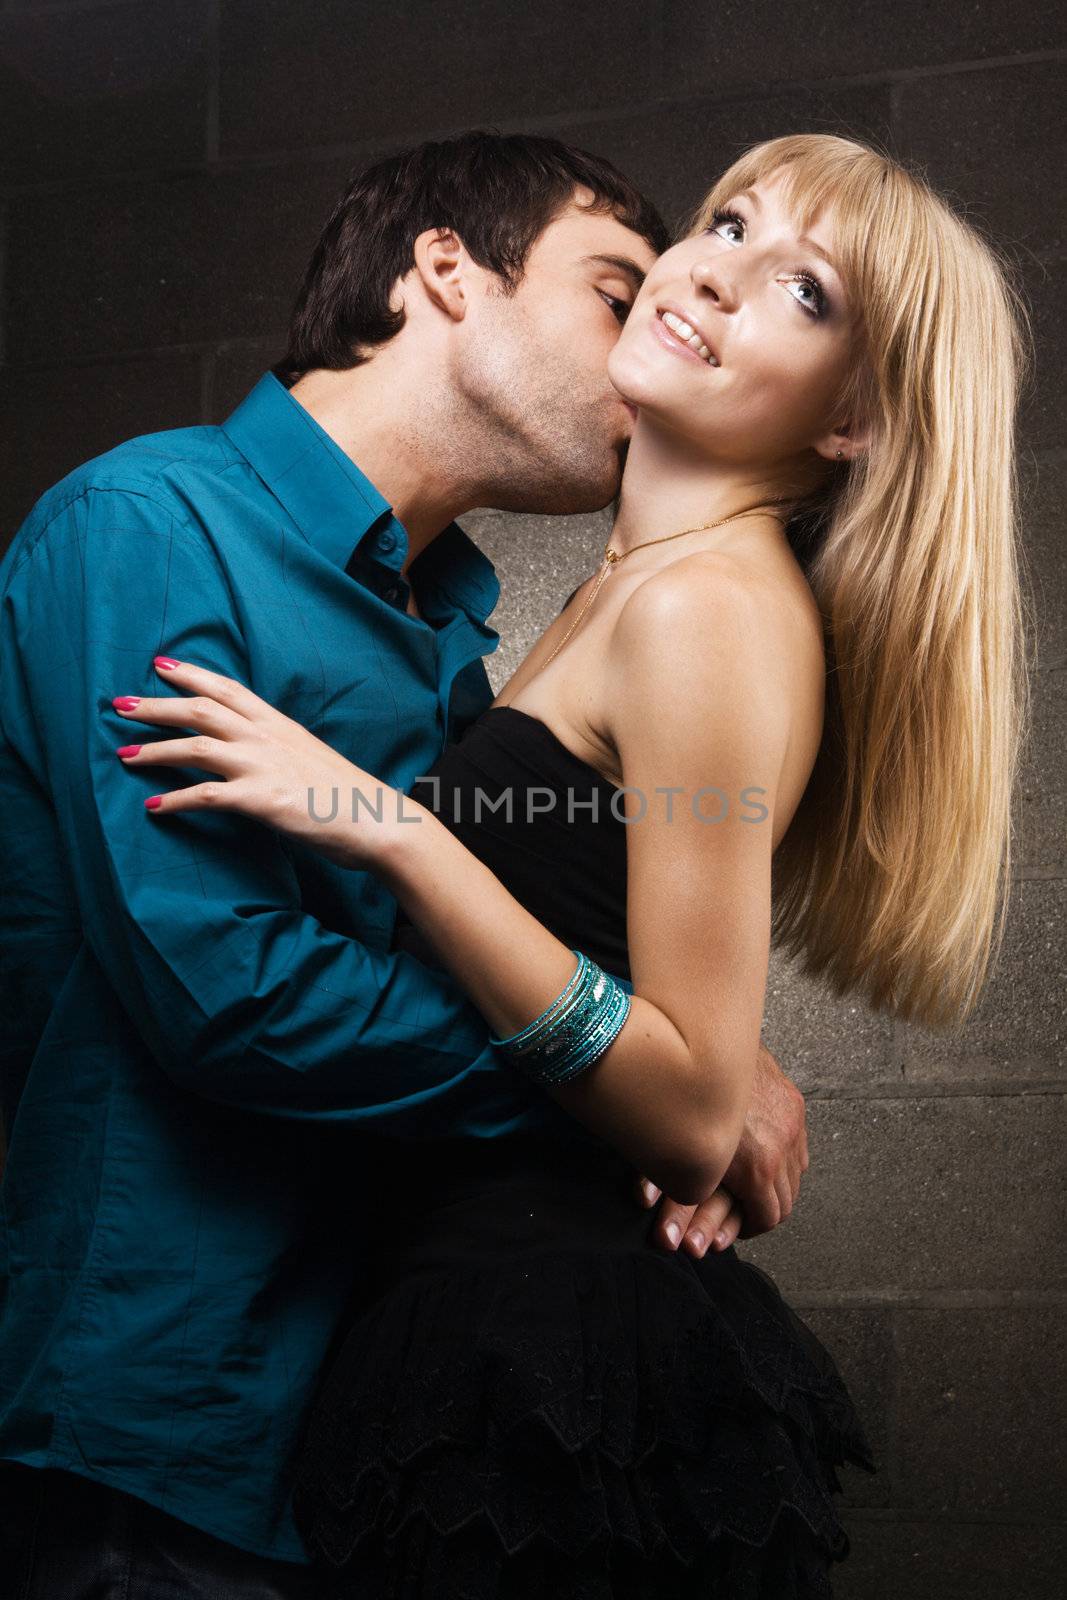 Young romantic couple kissing in house interior 